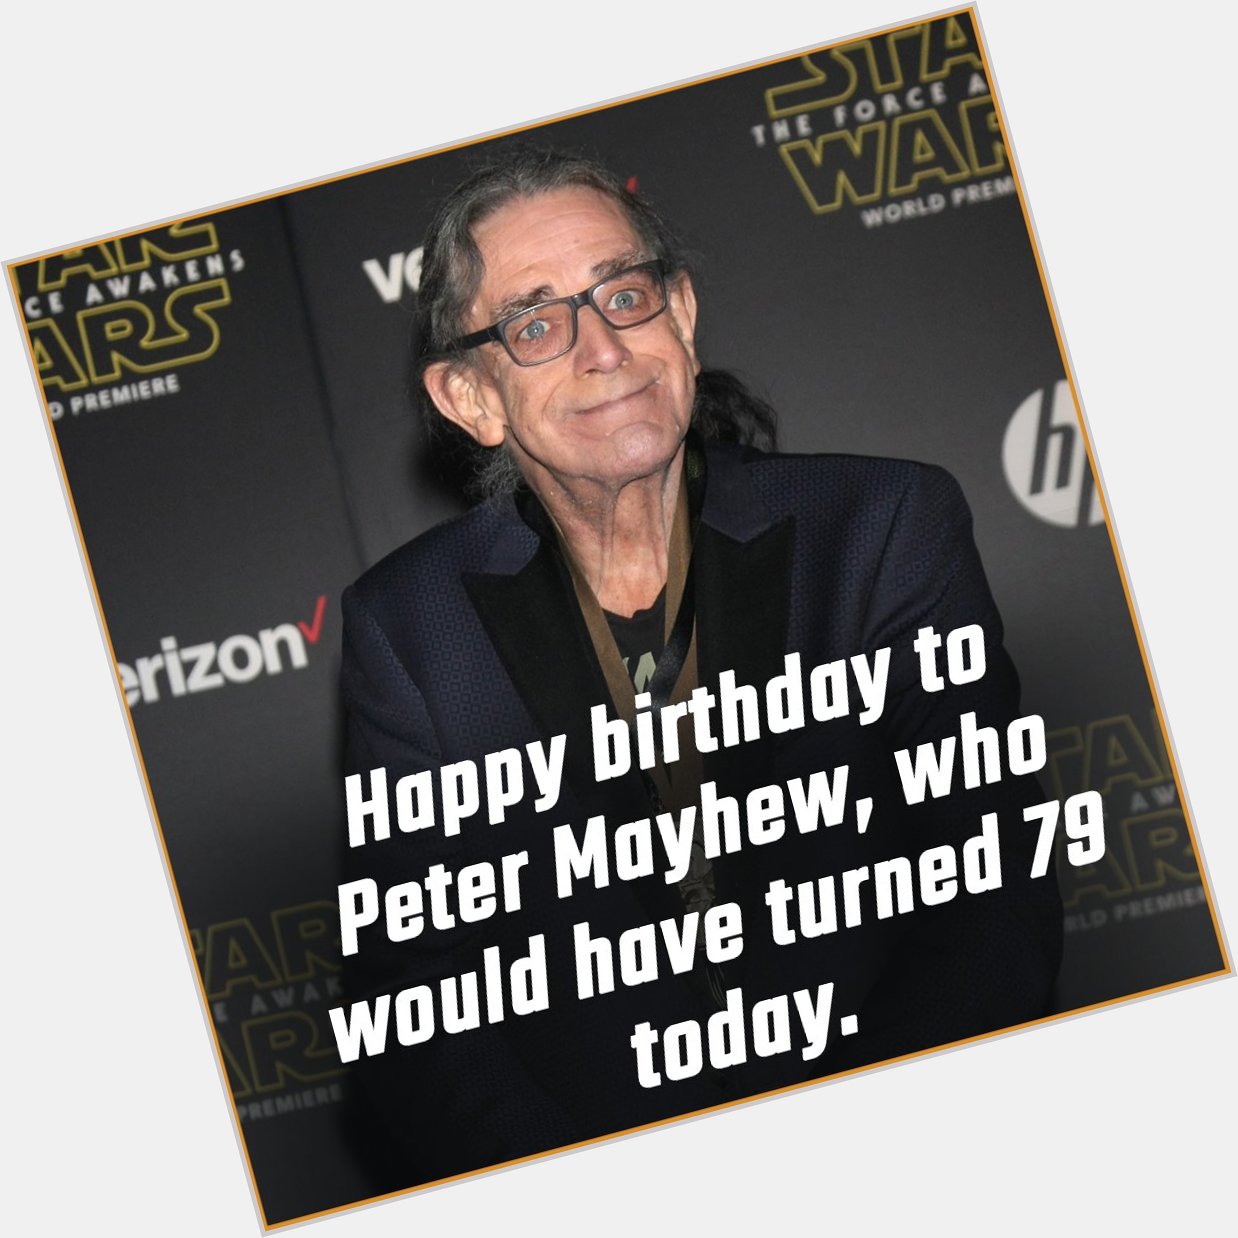 Happy birthday to Peter Mayhew, who portrayed one of the most iconic Star Wars characters of all time. 